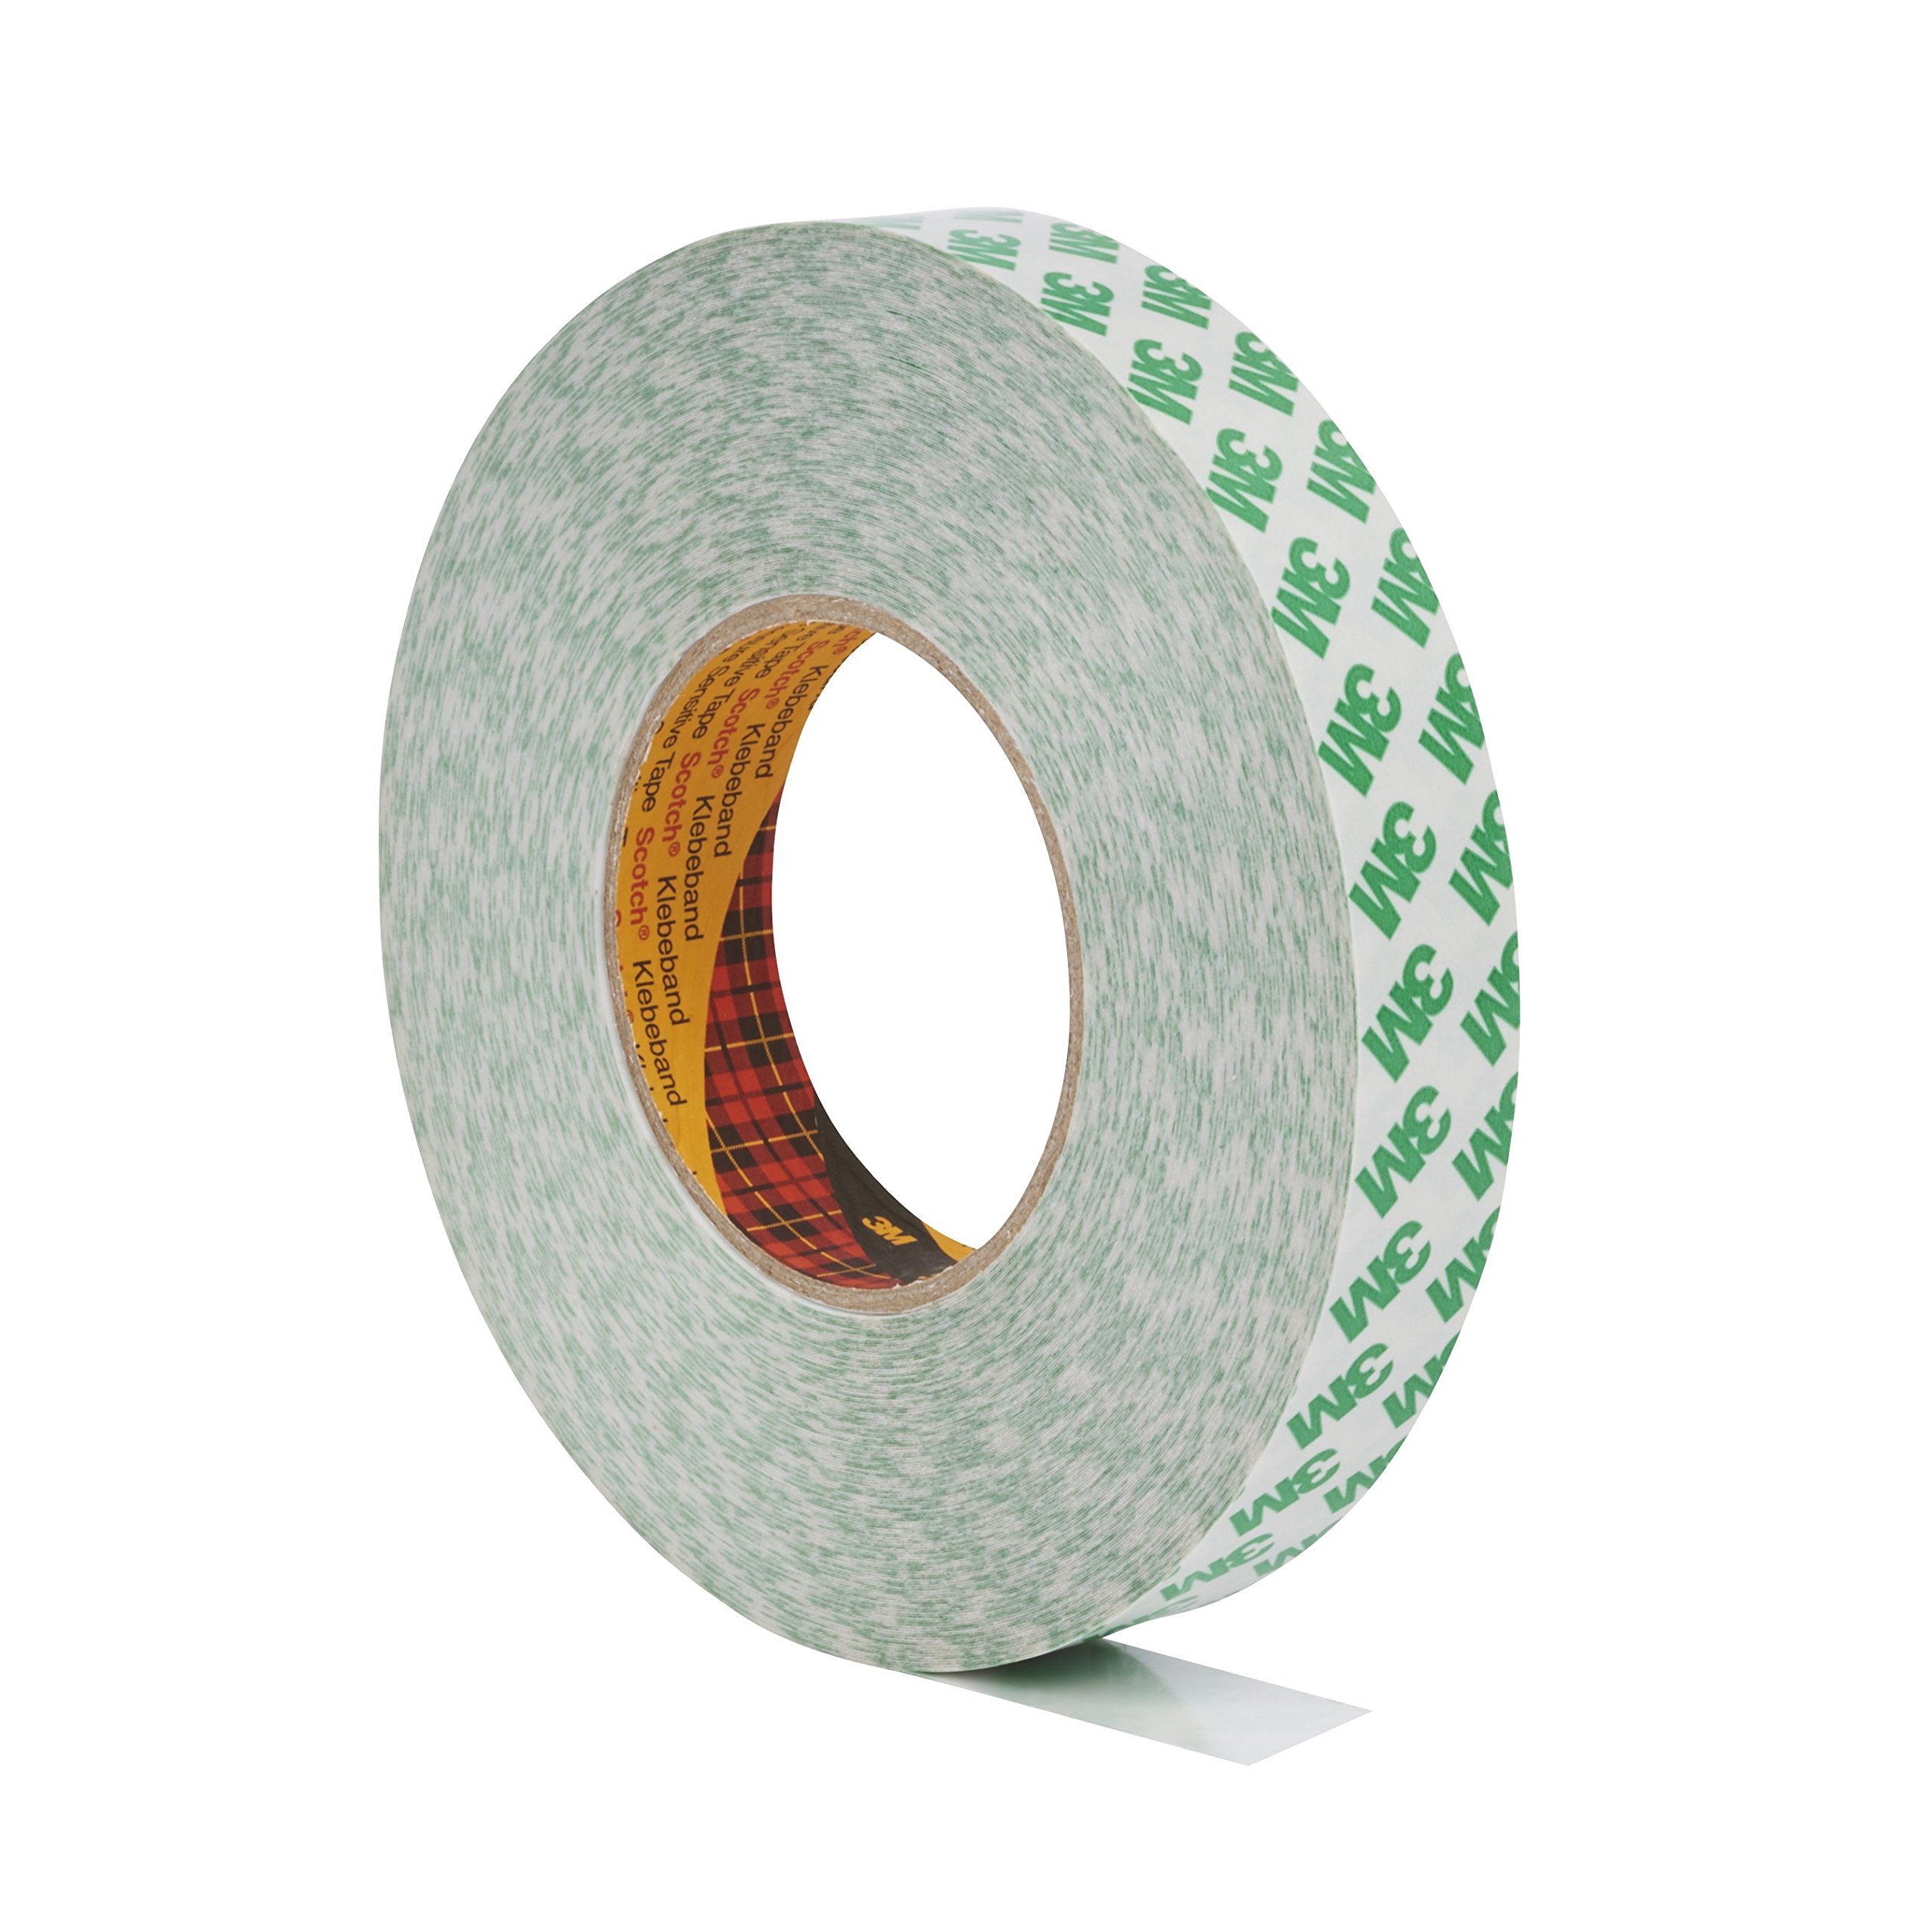 3M™ 9087 Double Coated Tape 12mm x 50m